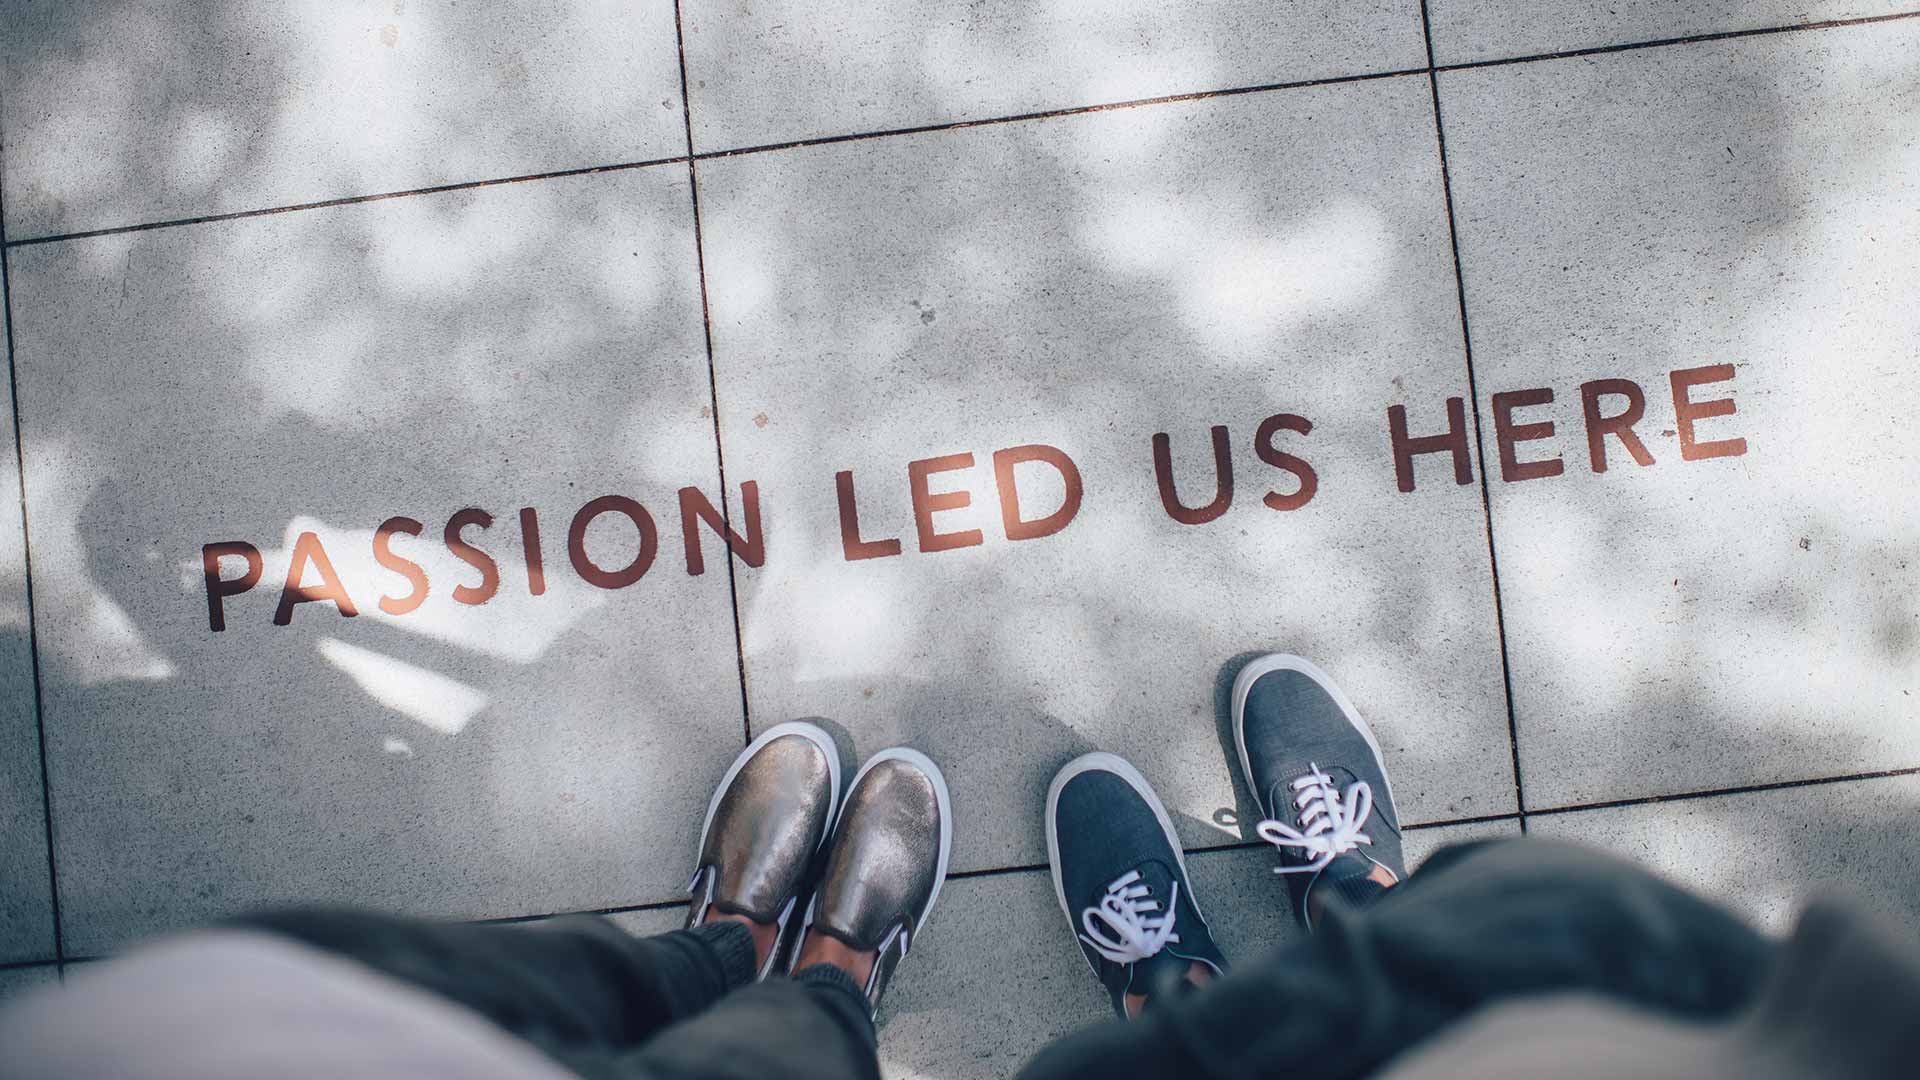 Two people standing on concrete in front of the words 'Passion led us here'